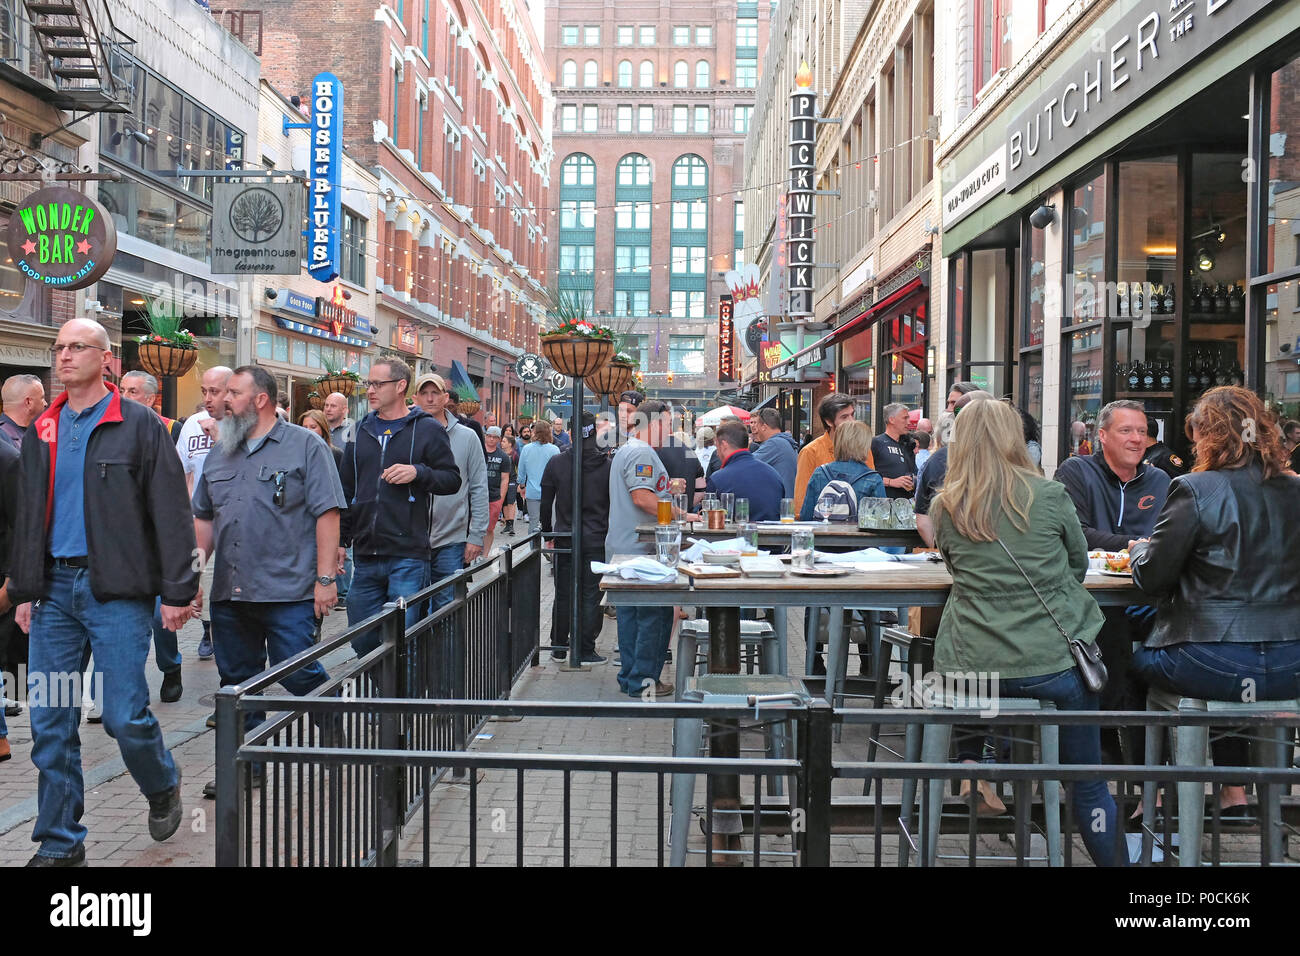 Lively East 4th in downtown Cleveland, Ohio, USA is one of several entertainment districts highlighted by outdoor dining and drinking during summer. Stock Photo